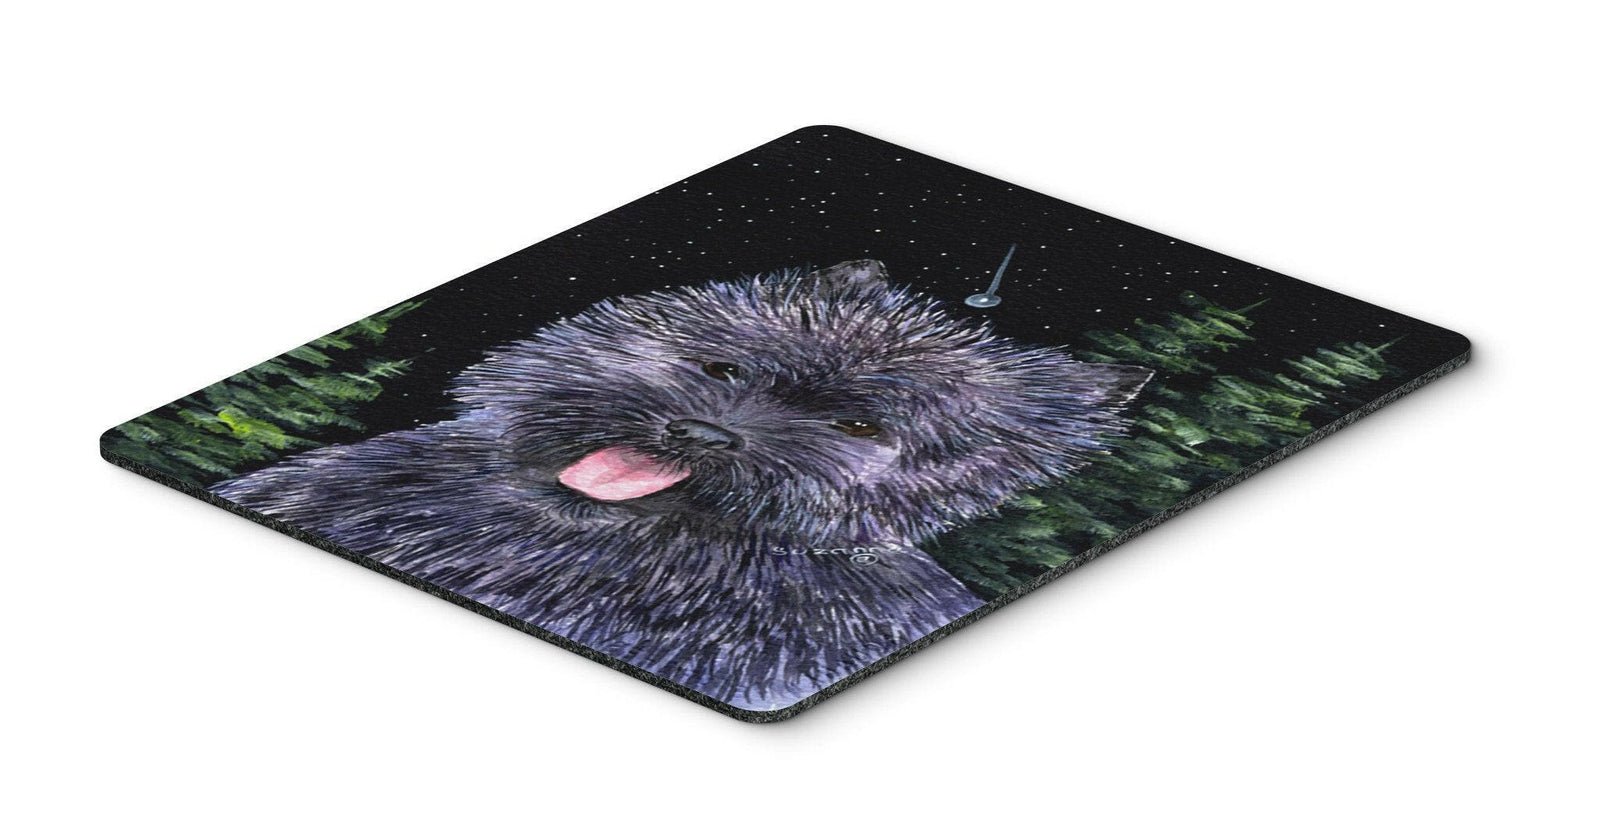 Starry Night Cairn Terrier Mouse Pad / Hot Pad / Trivet by Caroline's Treasures